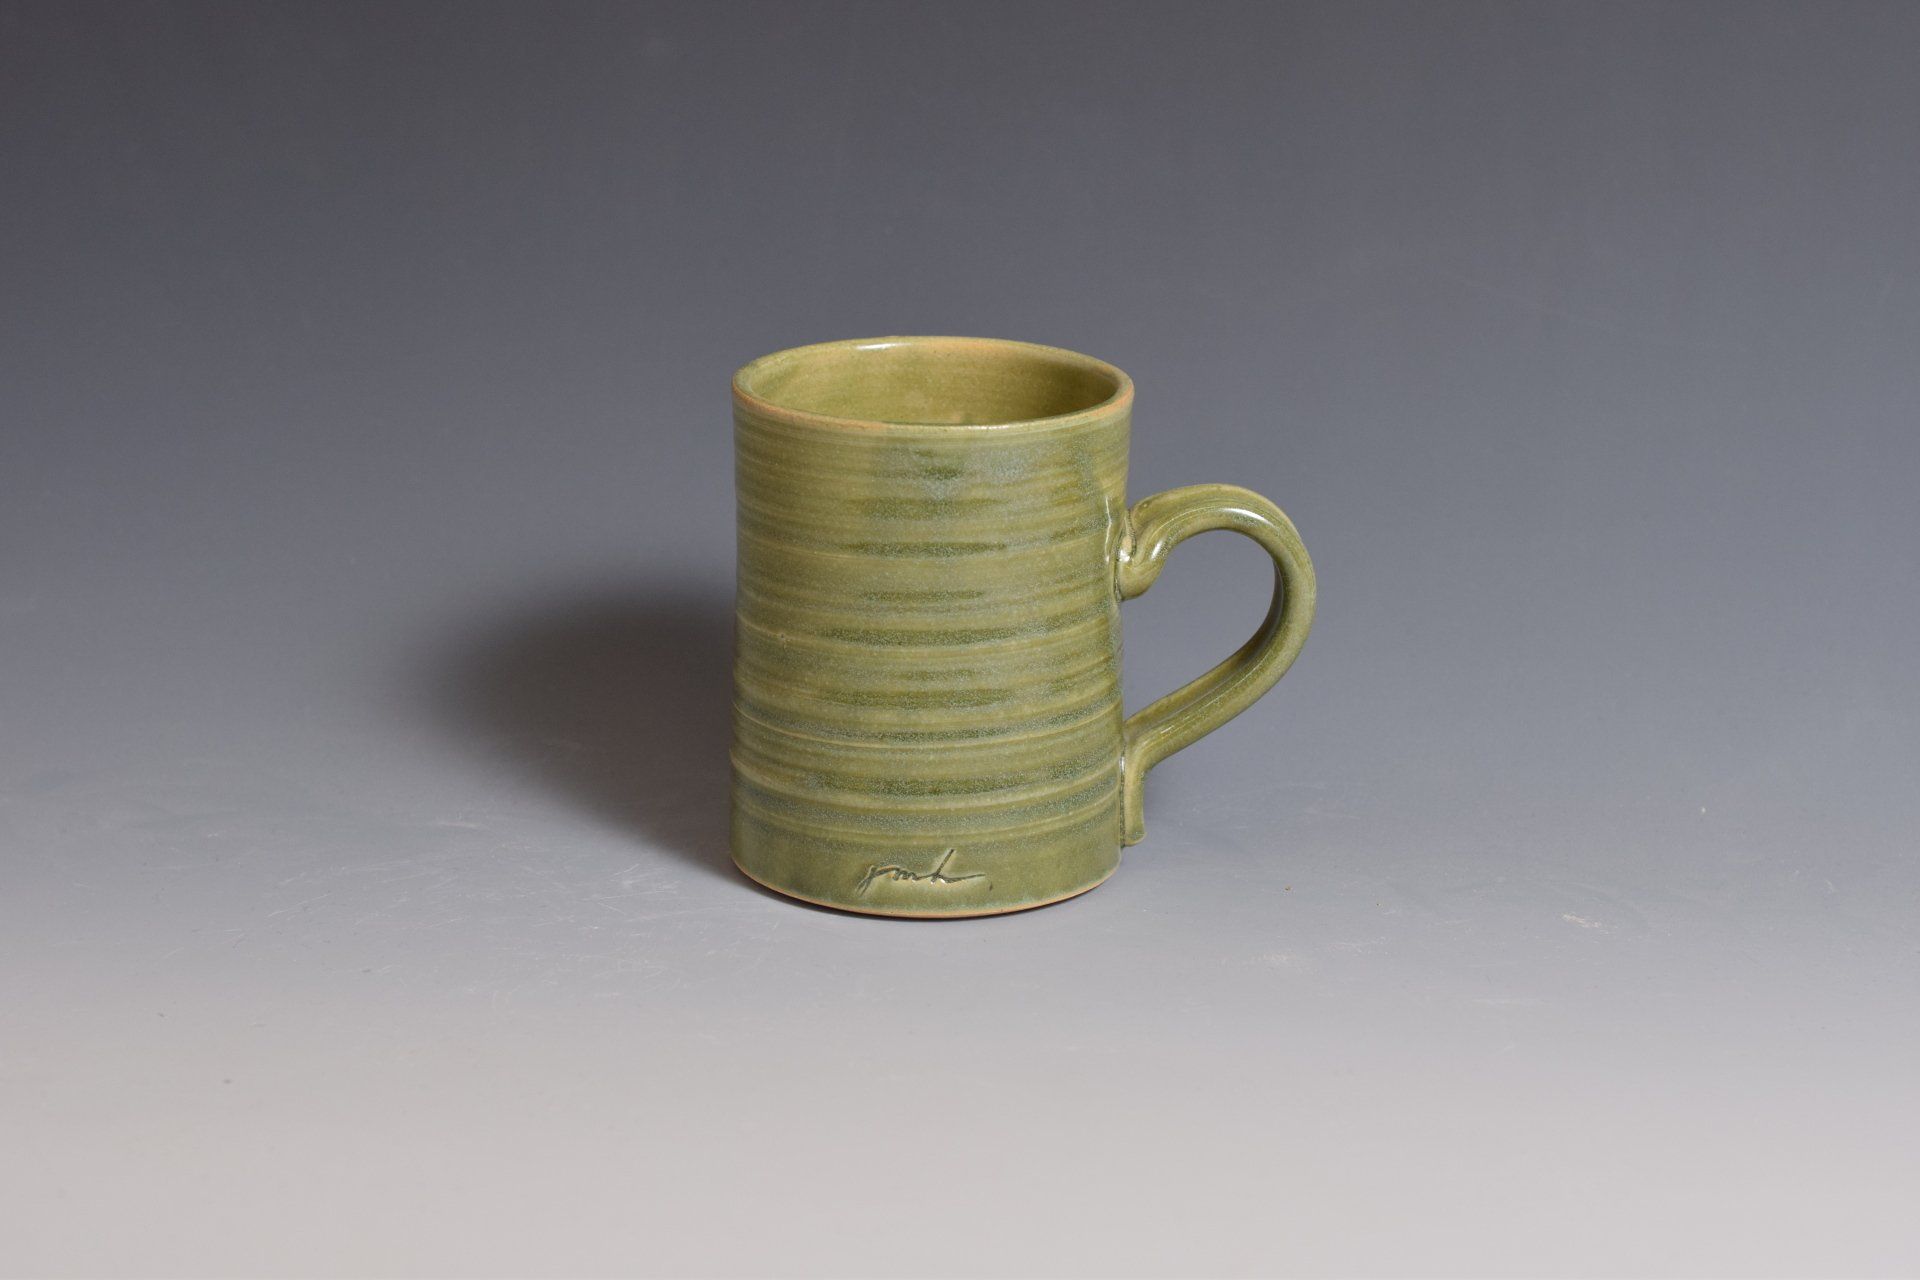 a green mug with a handle is sitting on a table .